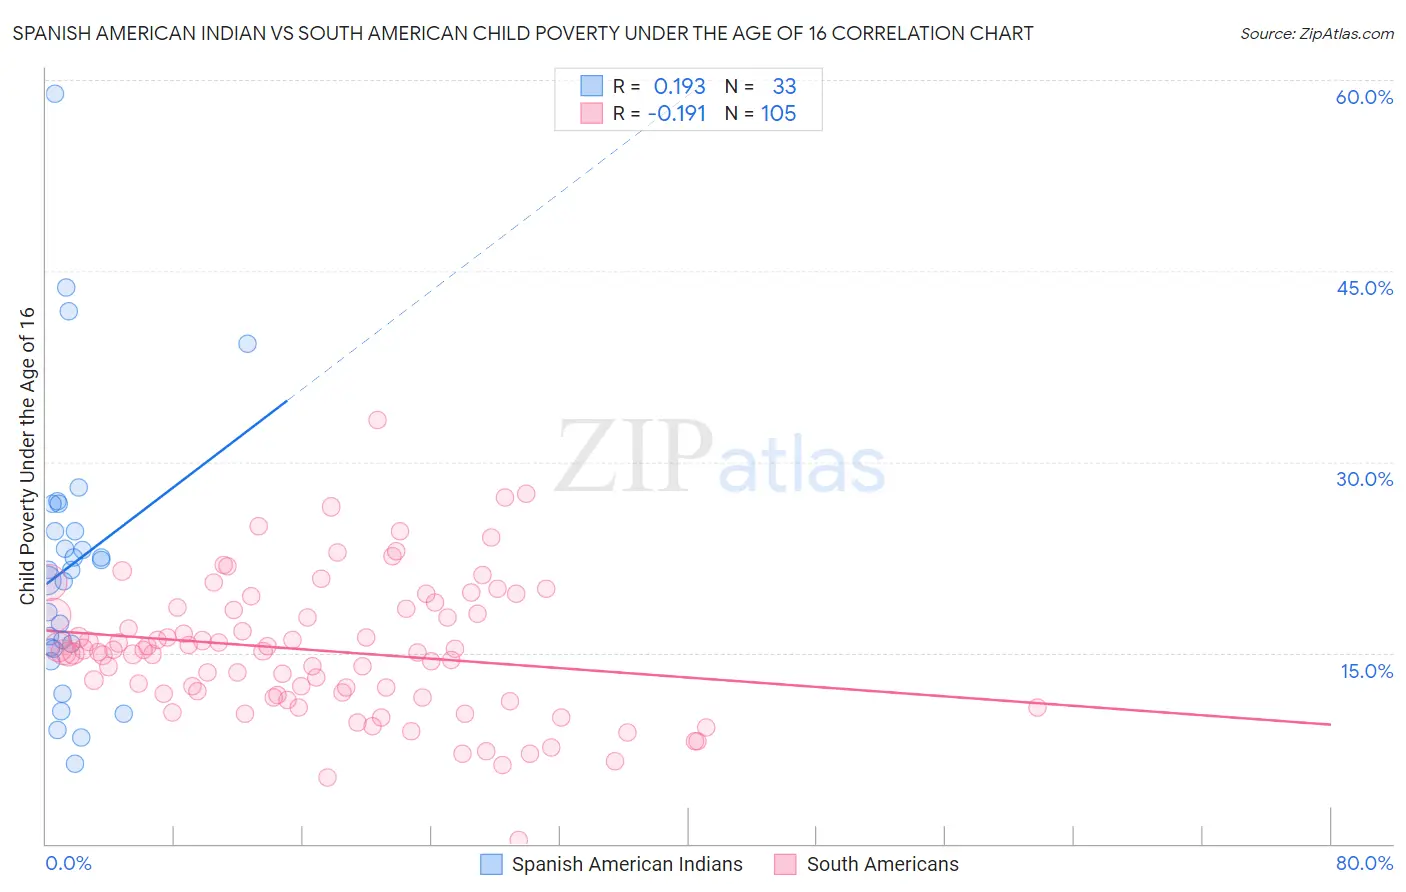 Spanish American Indian vs South American Child Poverty Under the Age of 16